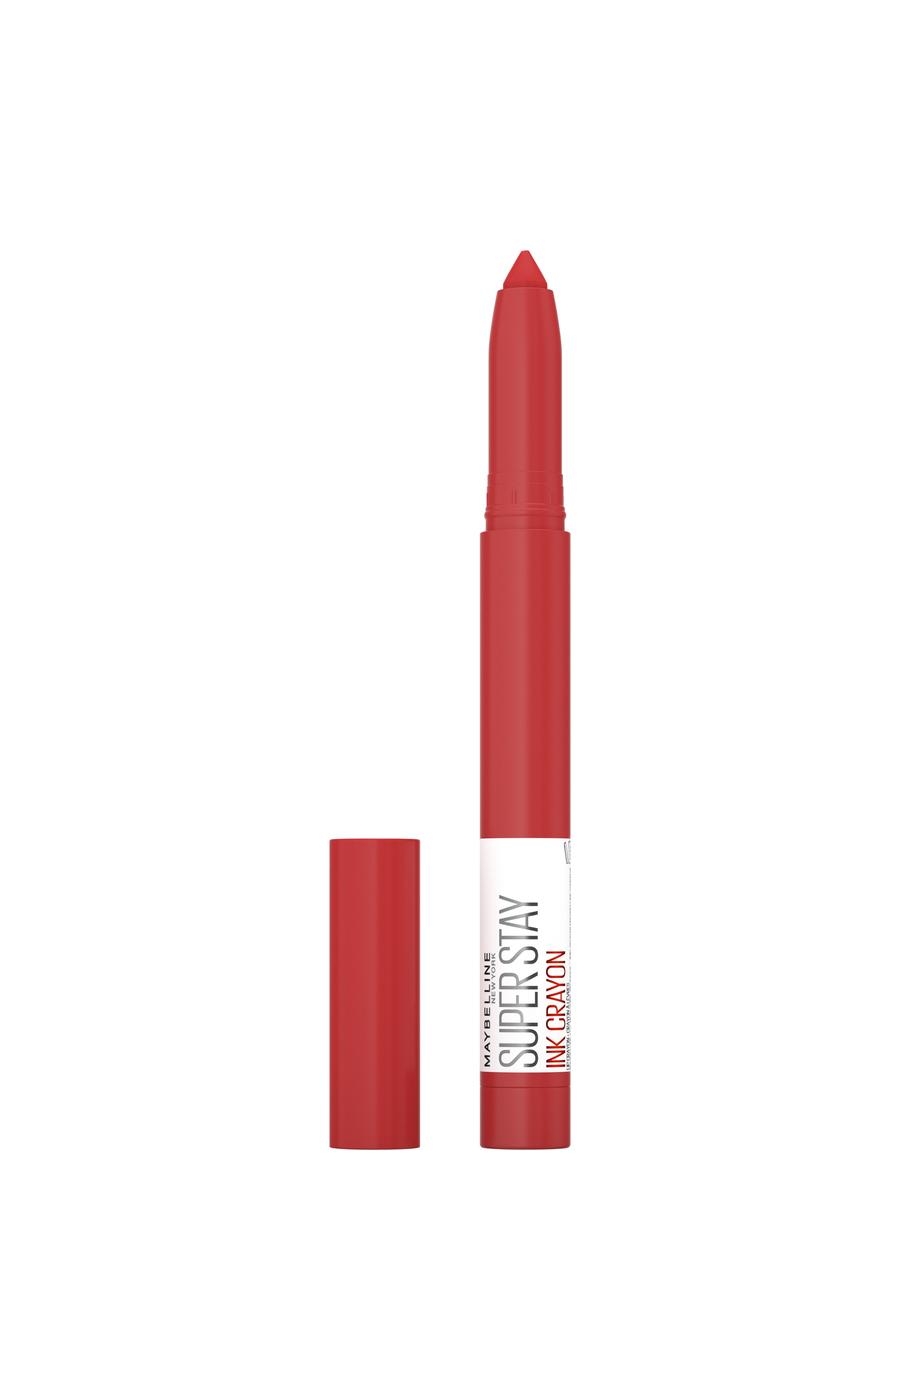 Maybelline Super Stay Ink Crayon Lipstick - Make Moves; image 1 of 2